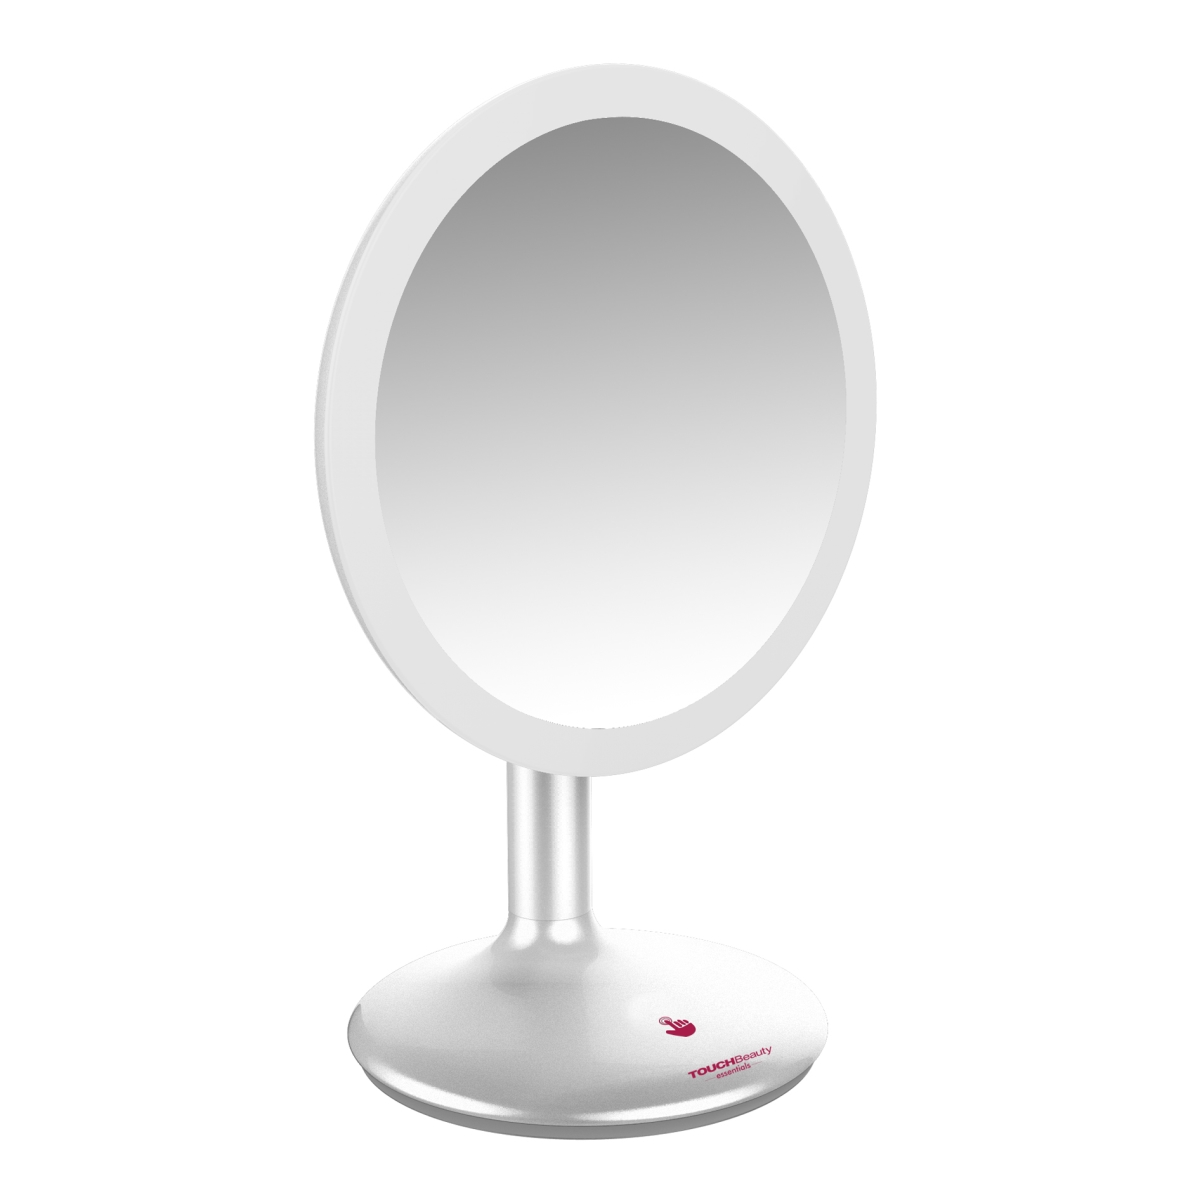 Tb-1677 Touch Beauty Led Light Makeup Mirror Stand